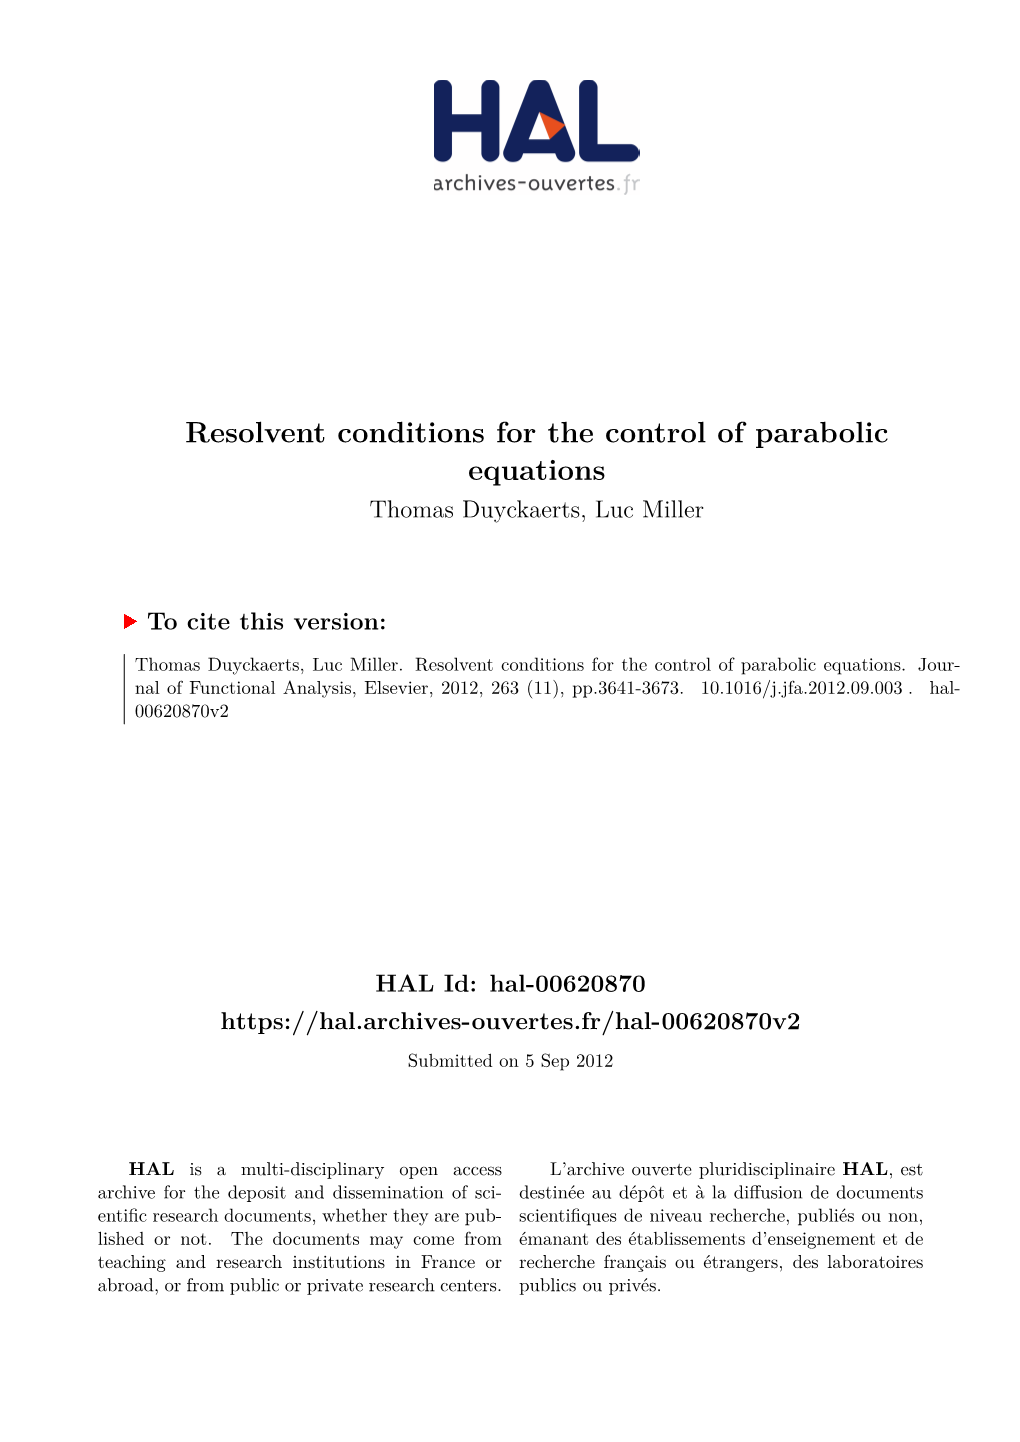 Resolvent Conditions for the Control of Parabolic Equations Thomas Duyckaerts, Luc Miller